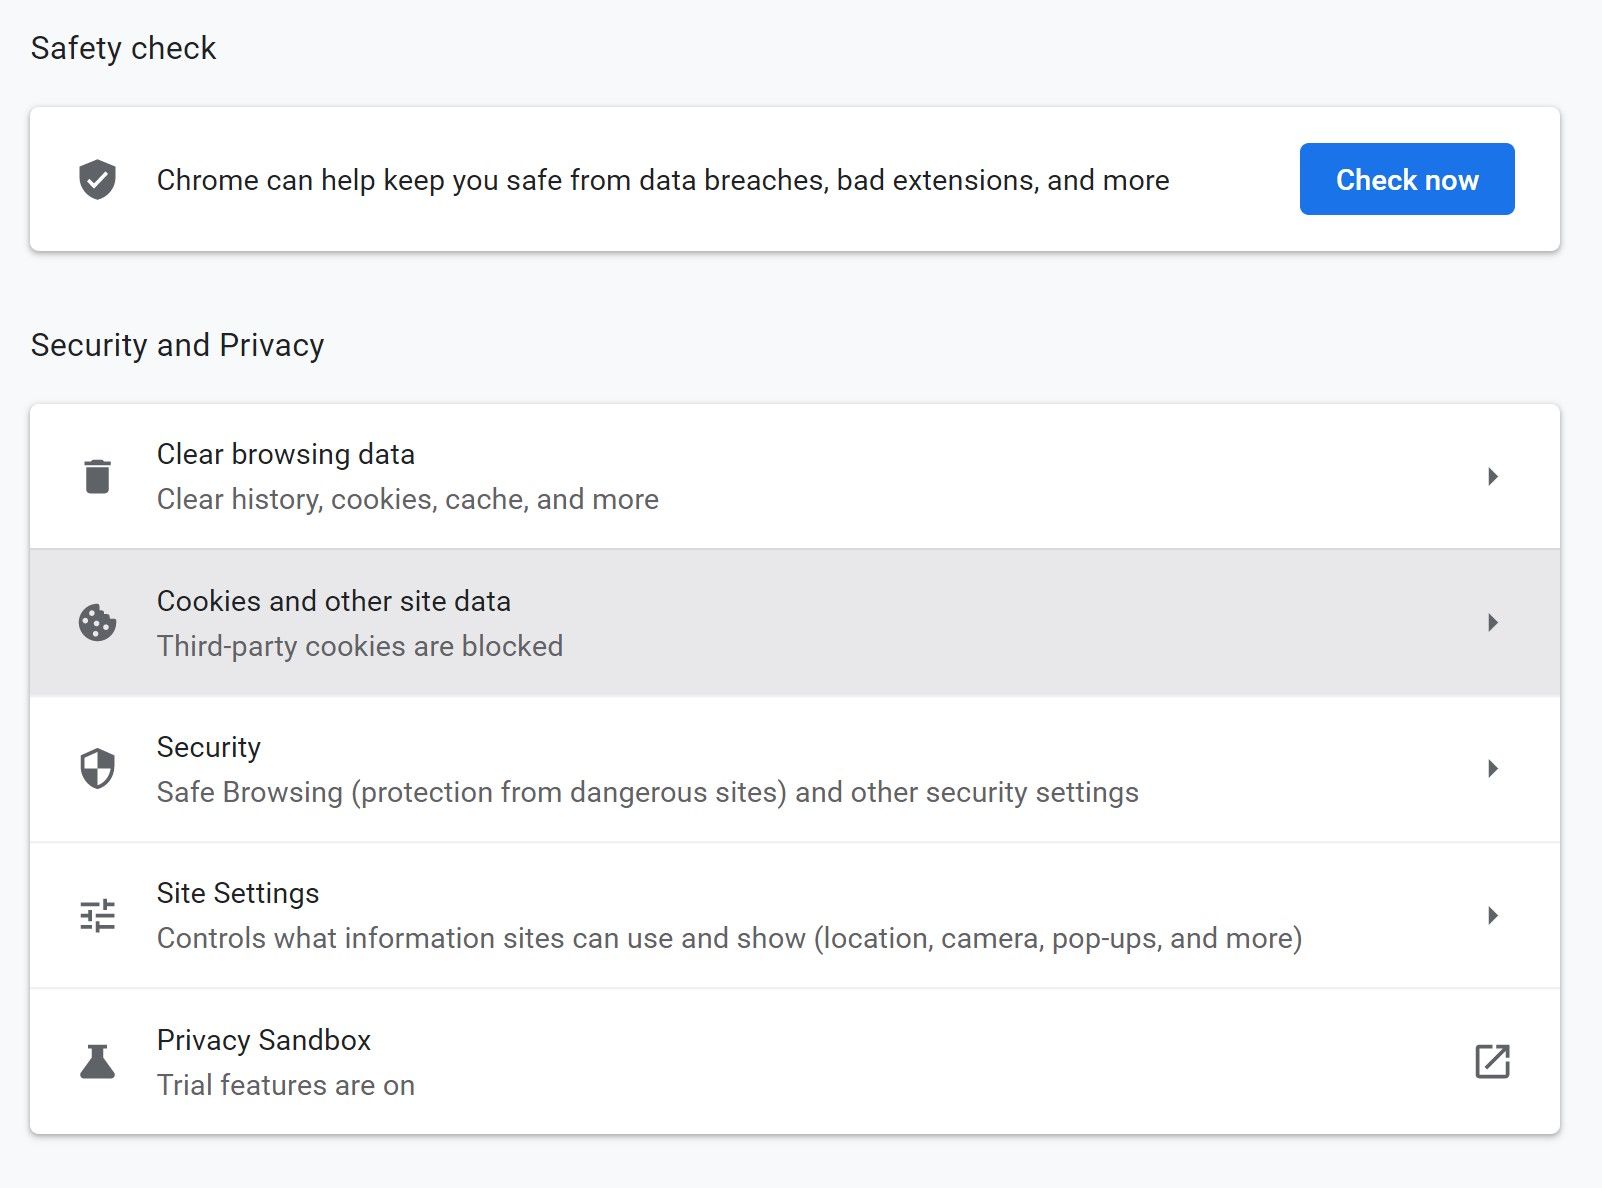 Security and Privacy settings in Google Chrome with the Cookies and other site data option highlighted